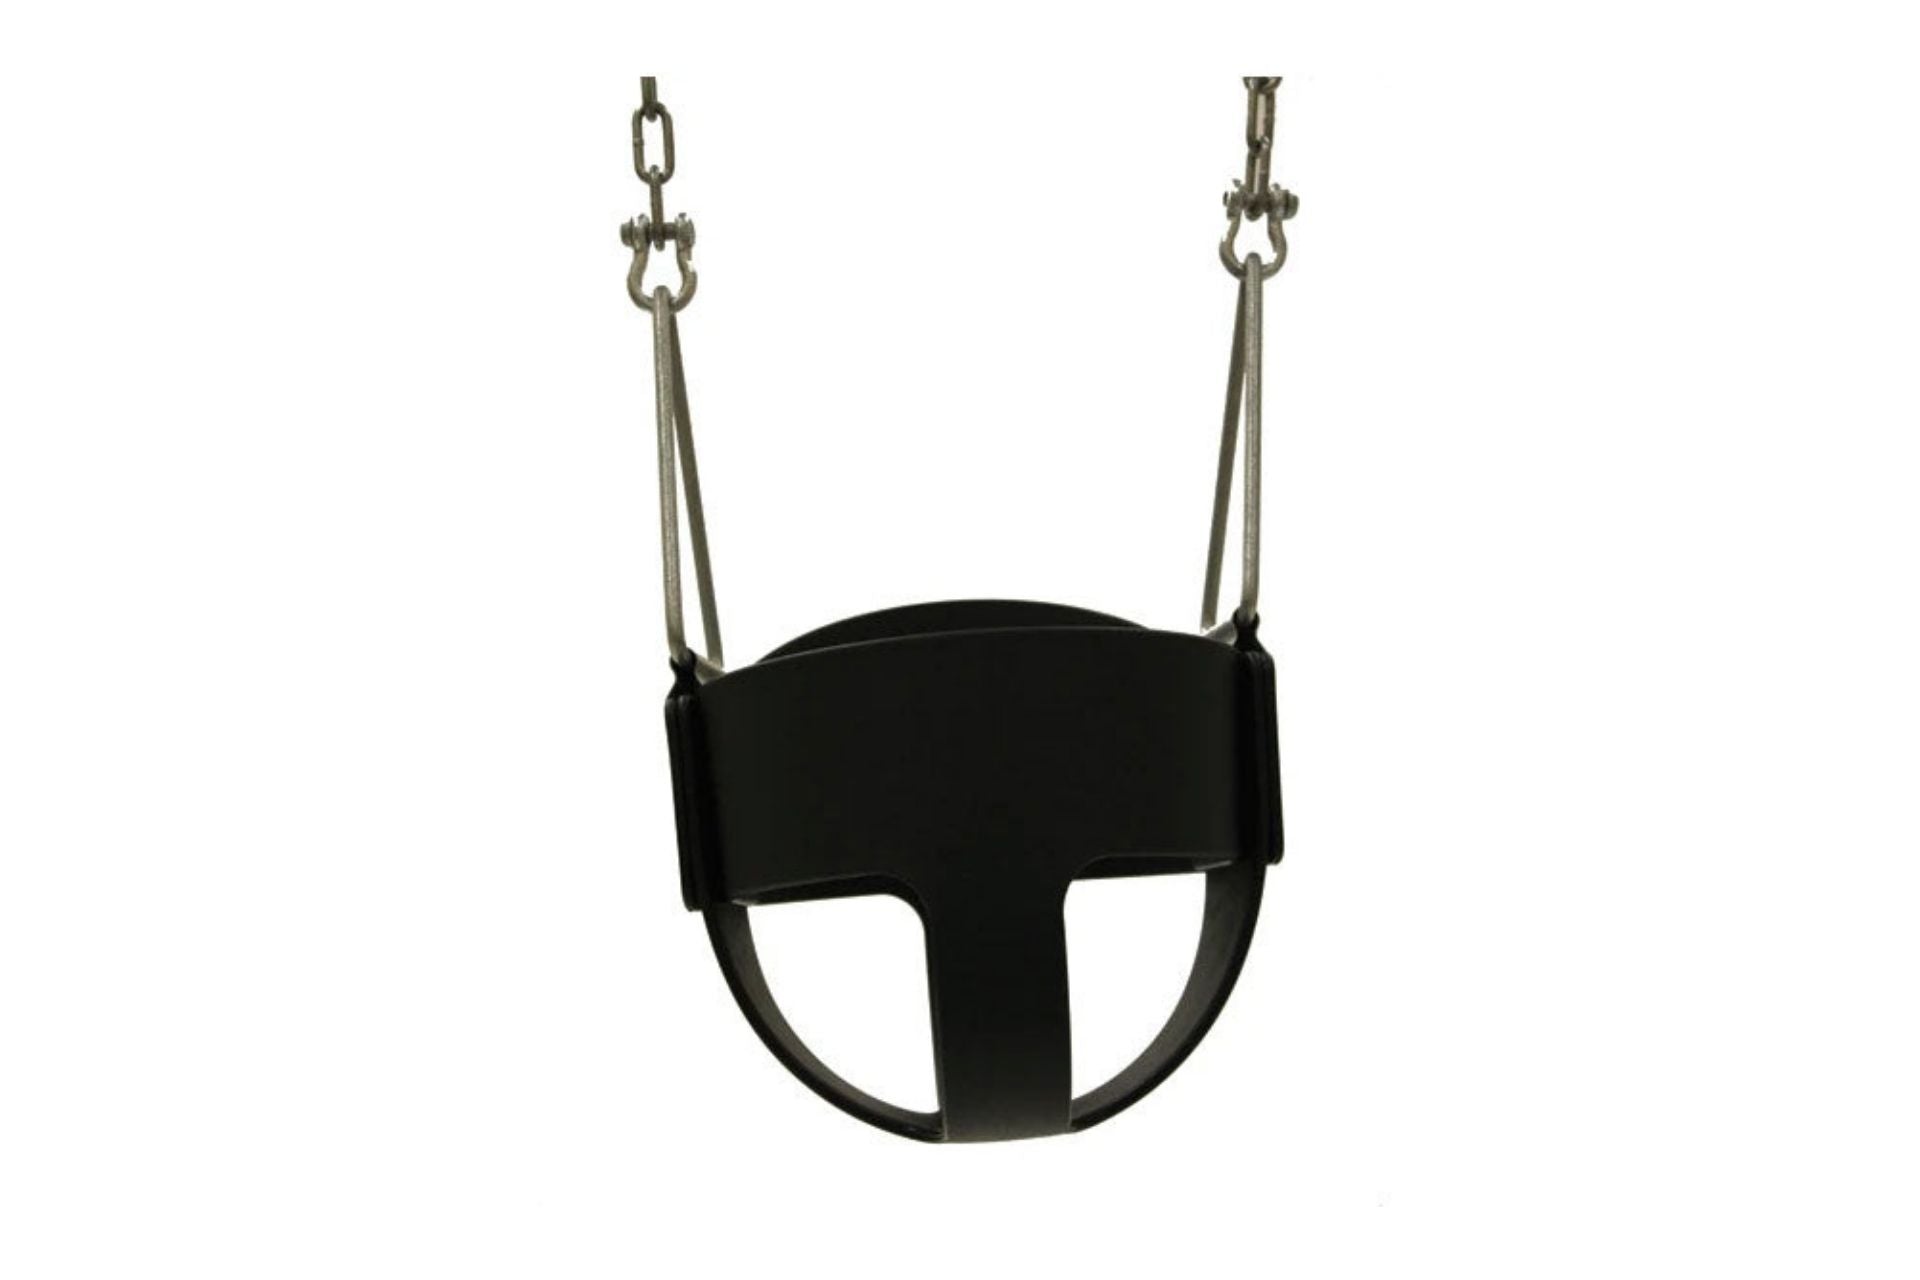 Full Bucket Replacement for Swing Set